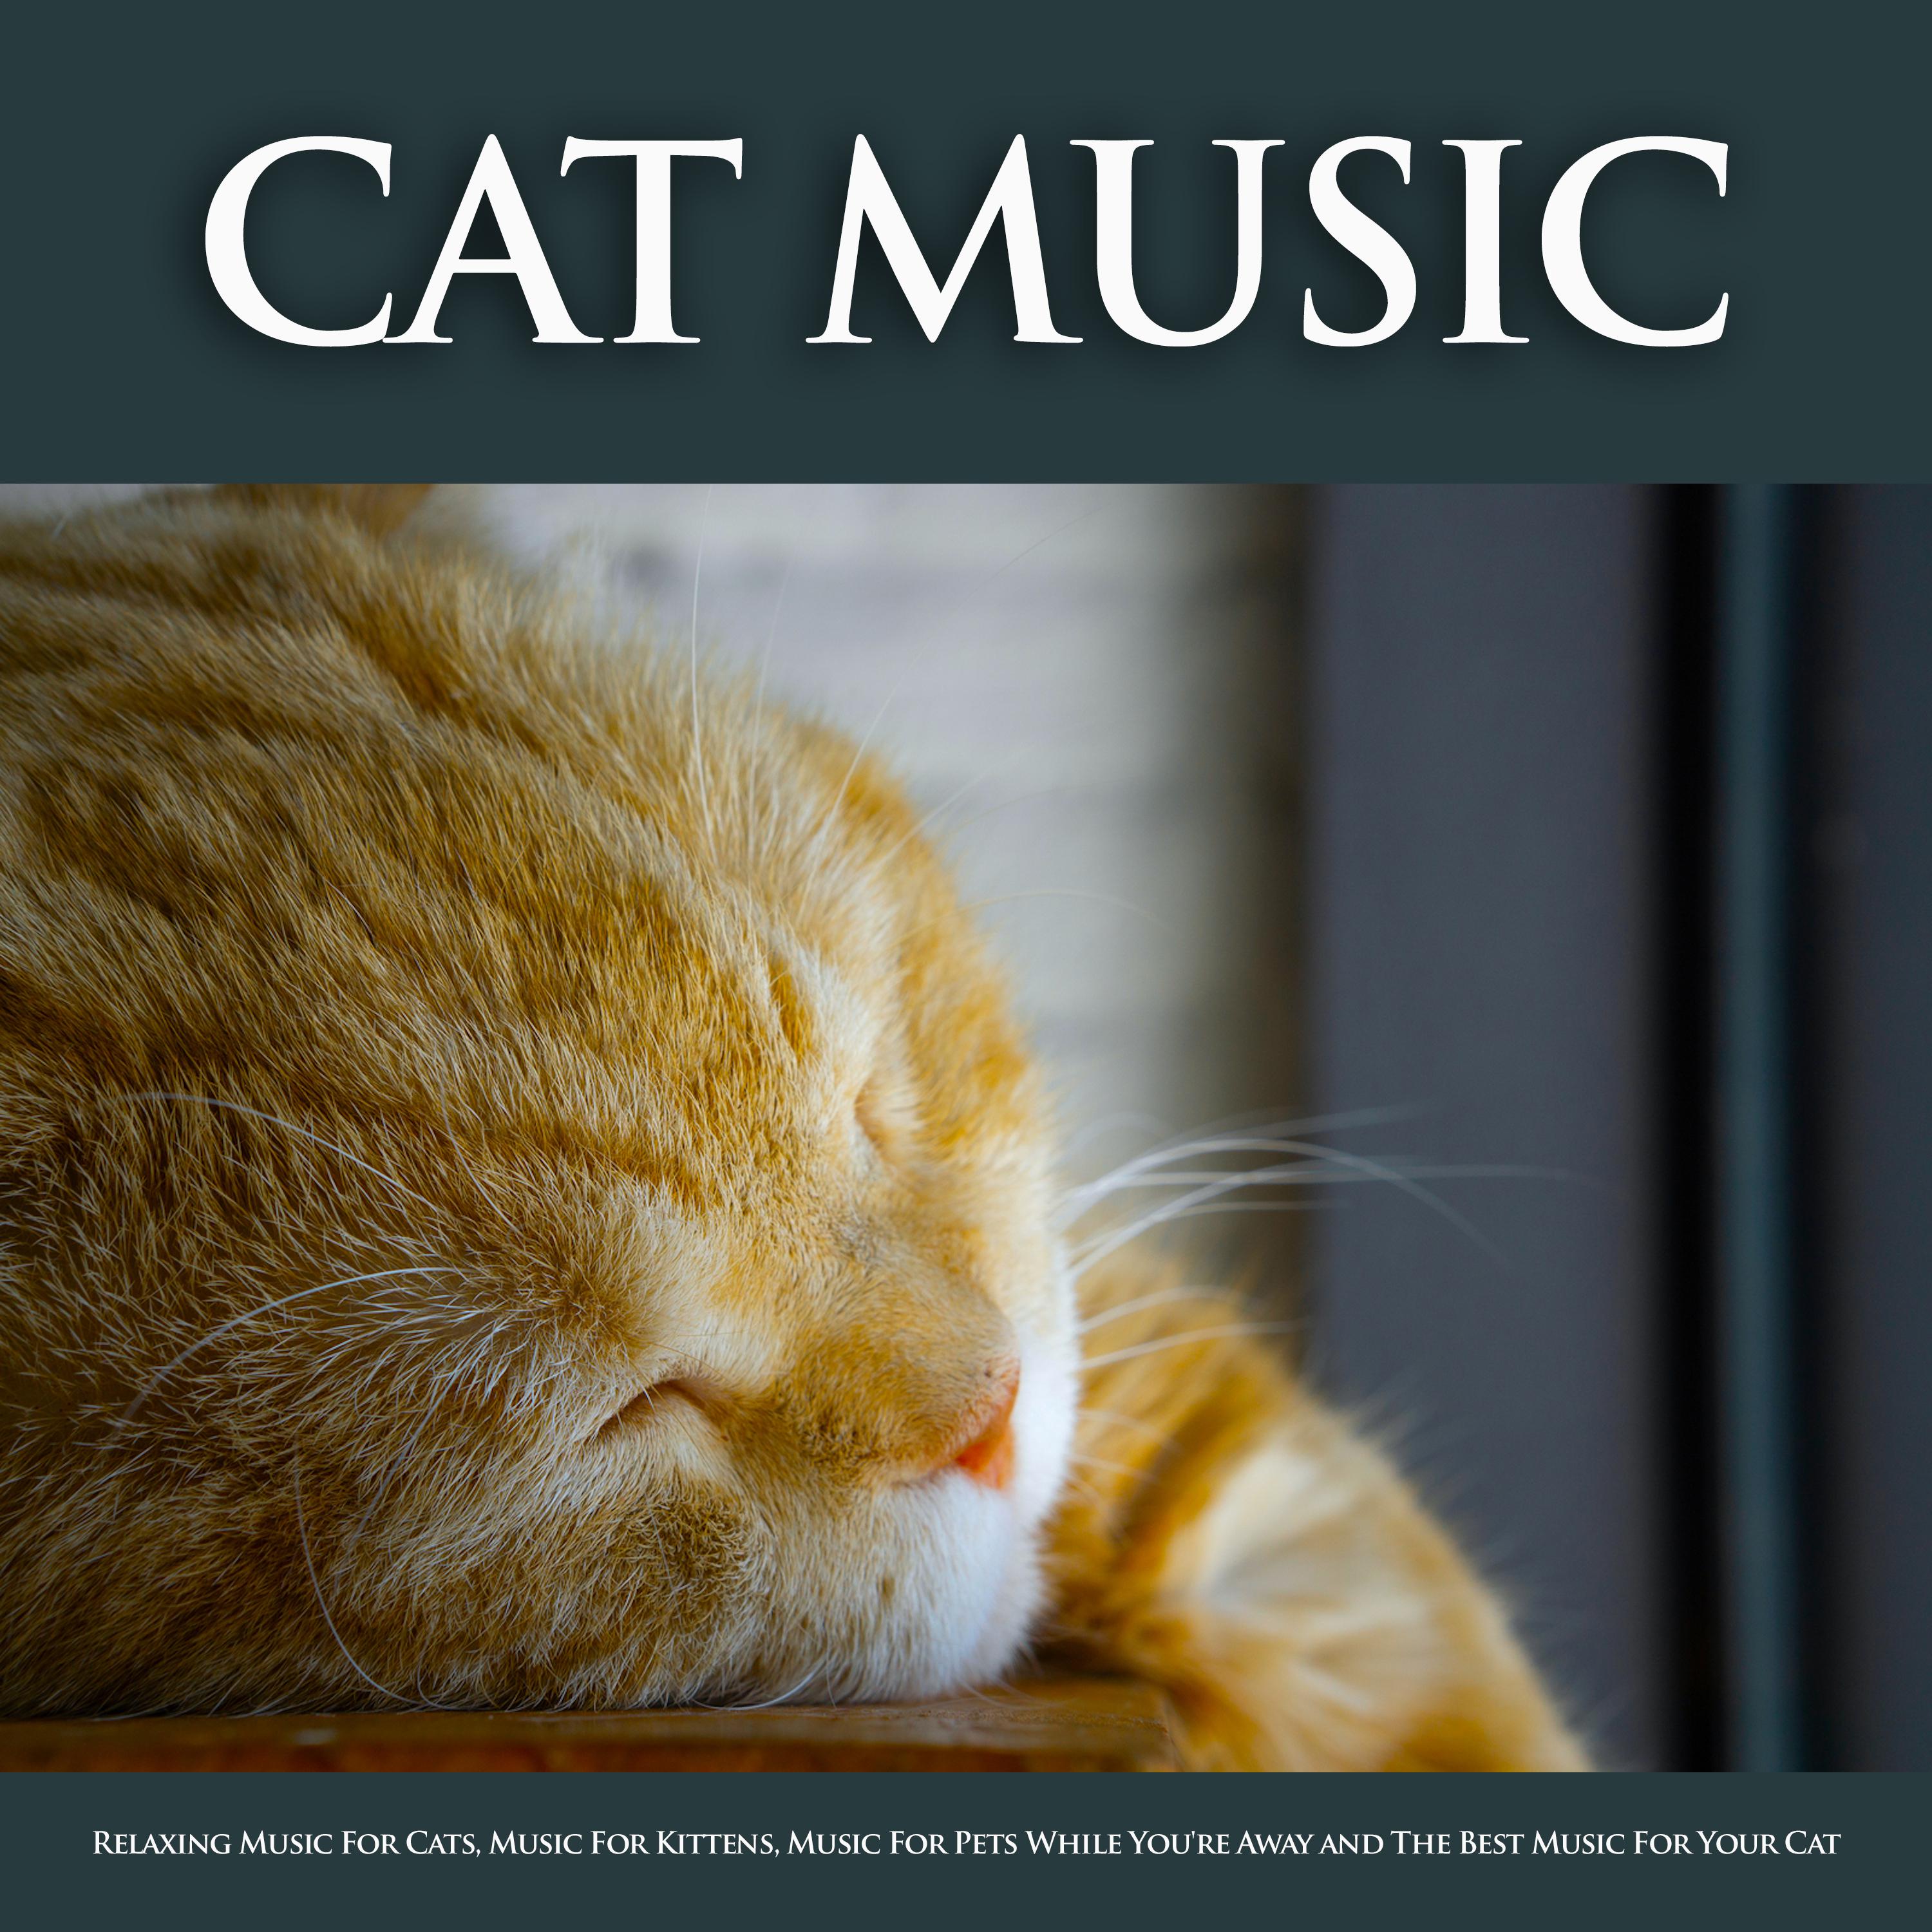 Music For Cats and Cats